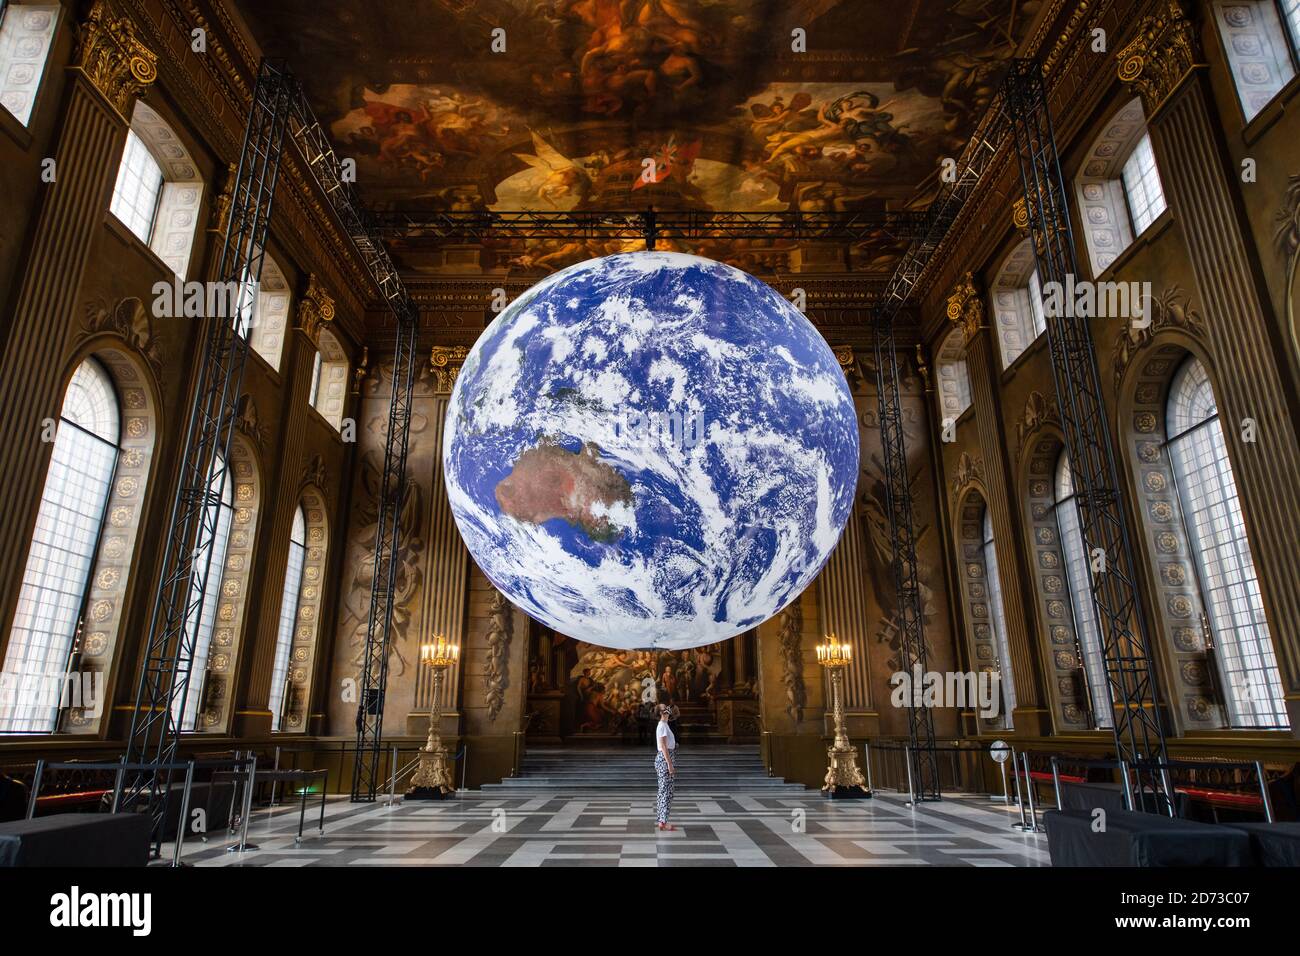 Luke Jerram's artwork Gaia, a replica of planet earth created using detailed NASA imagery of the Earth's surface, goes on display in the Painted Hall of the Old Royal Naval College, Greenwich, London, as part of the 2020 Greenwich+Docklands International Festival. Picture date: Friday August 28, 2020. Photo credit should read: Matt Crossick/Empics Stock Photo